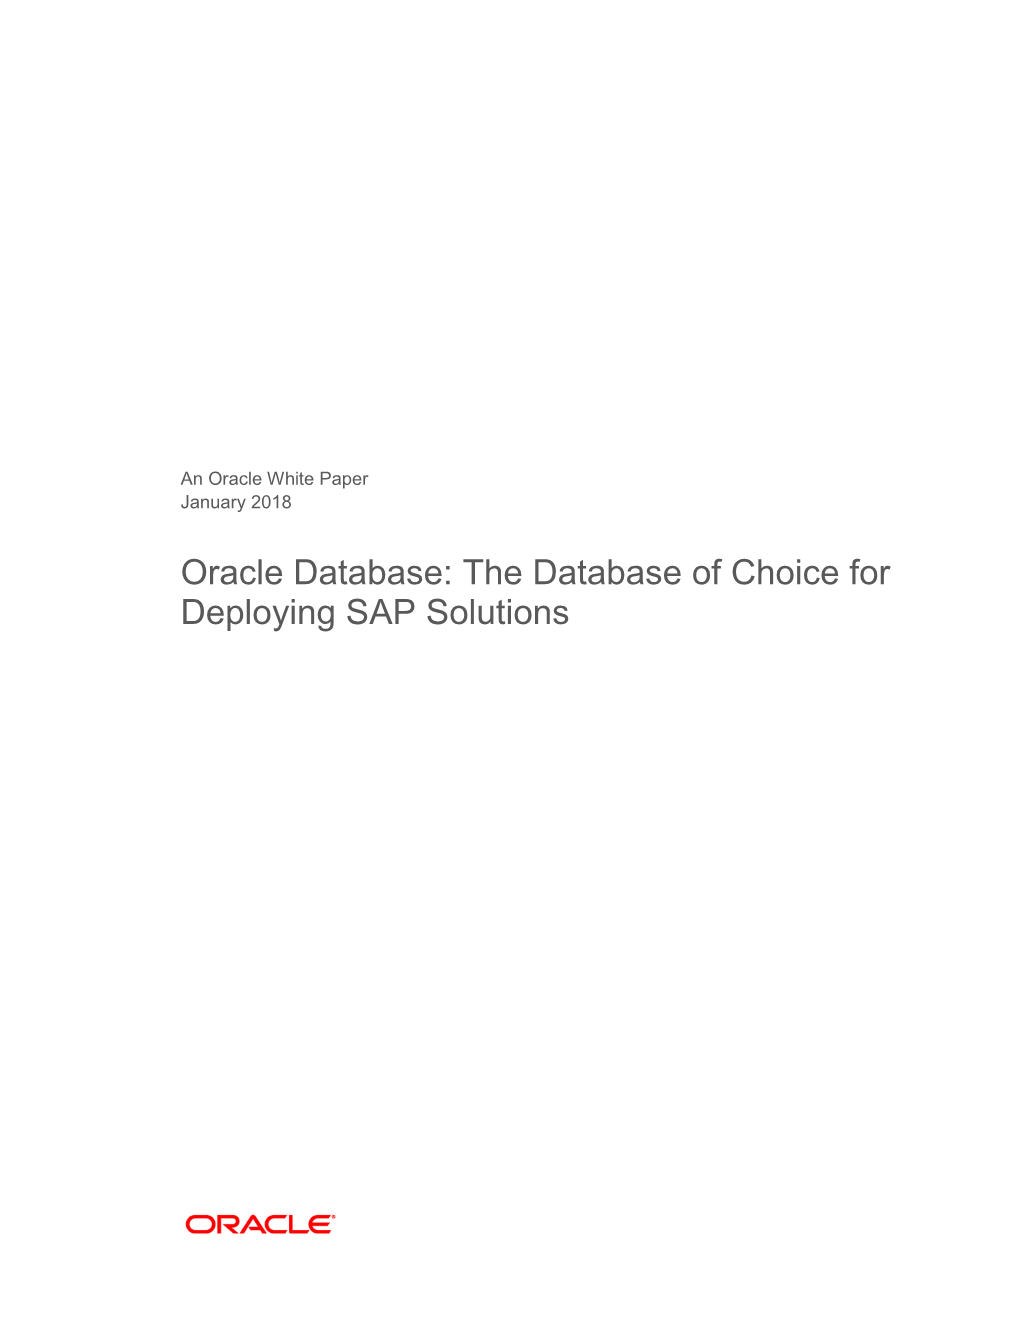 The Database of Choice for Deploying SAP Solutions